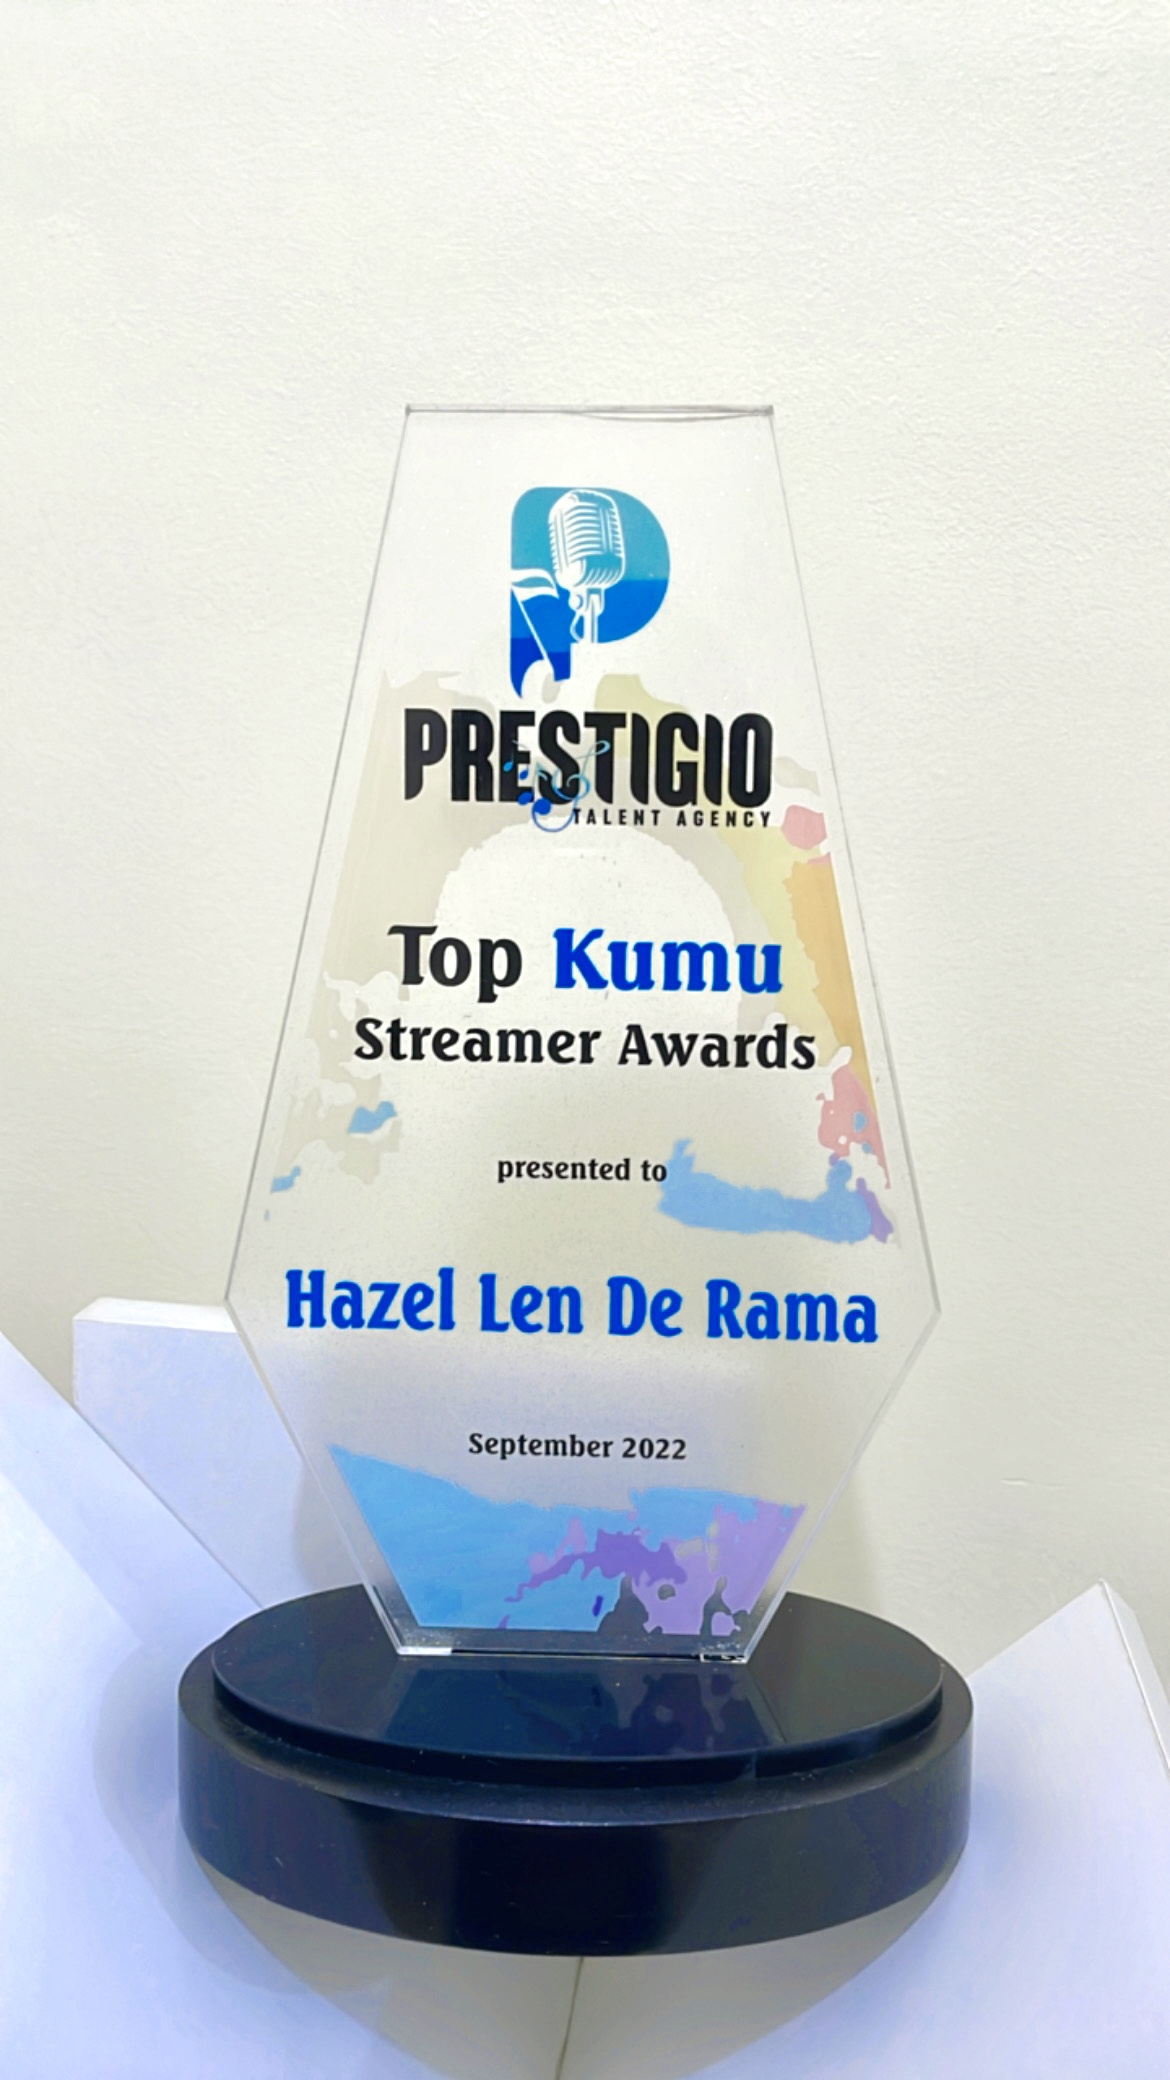 Award for being on top of kumu content creation